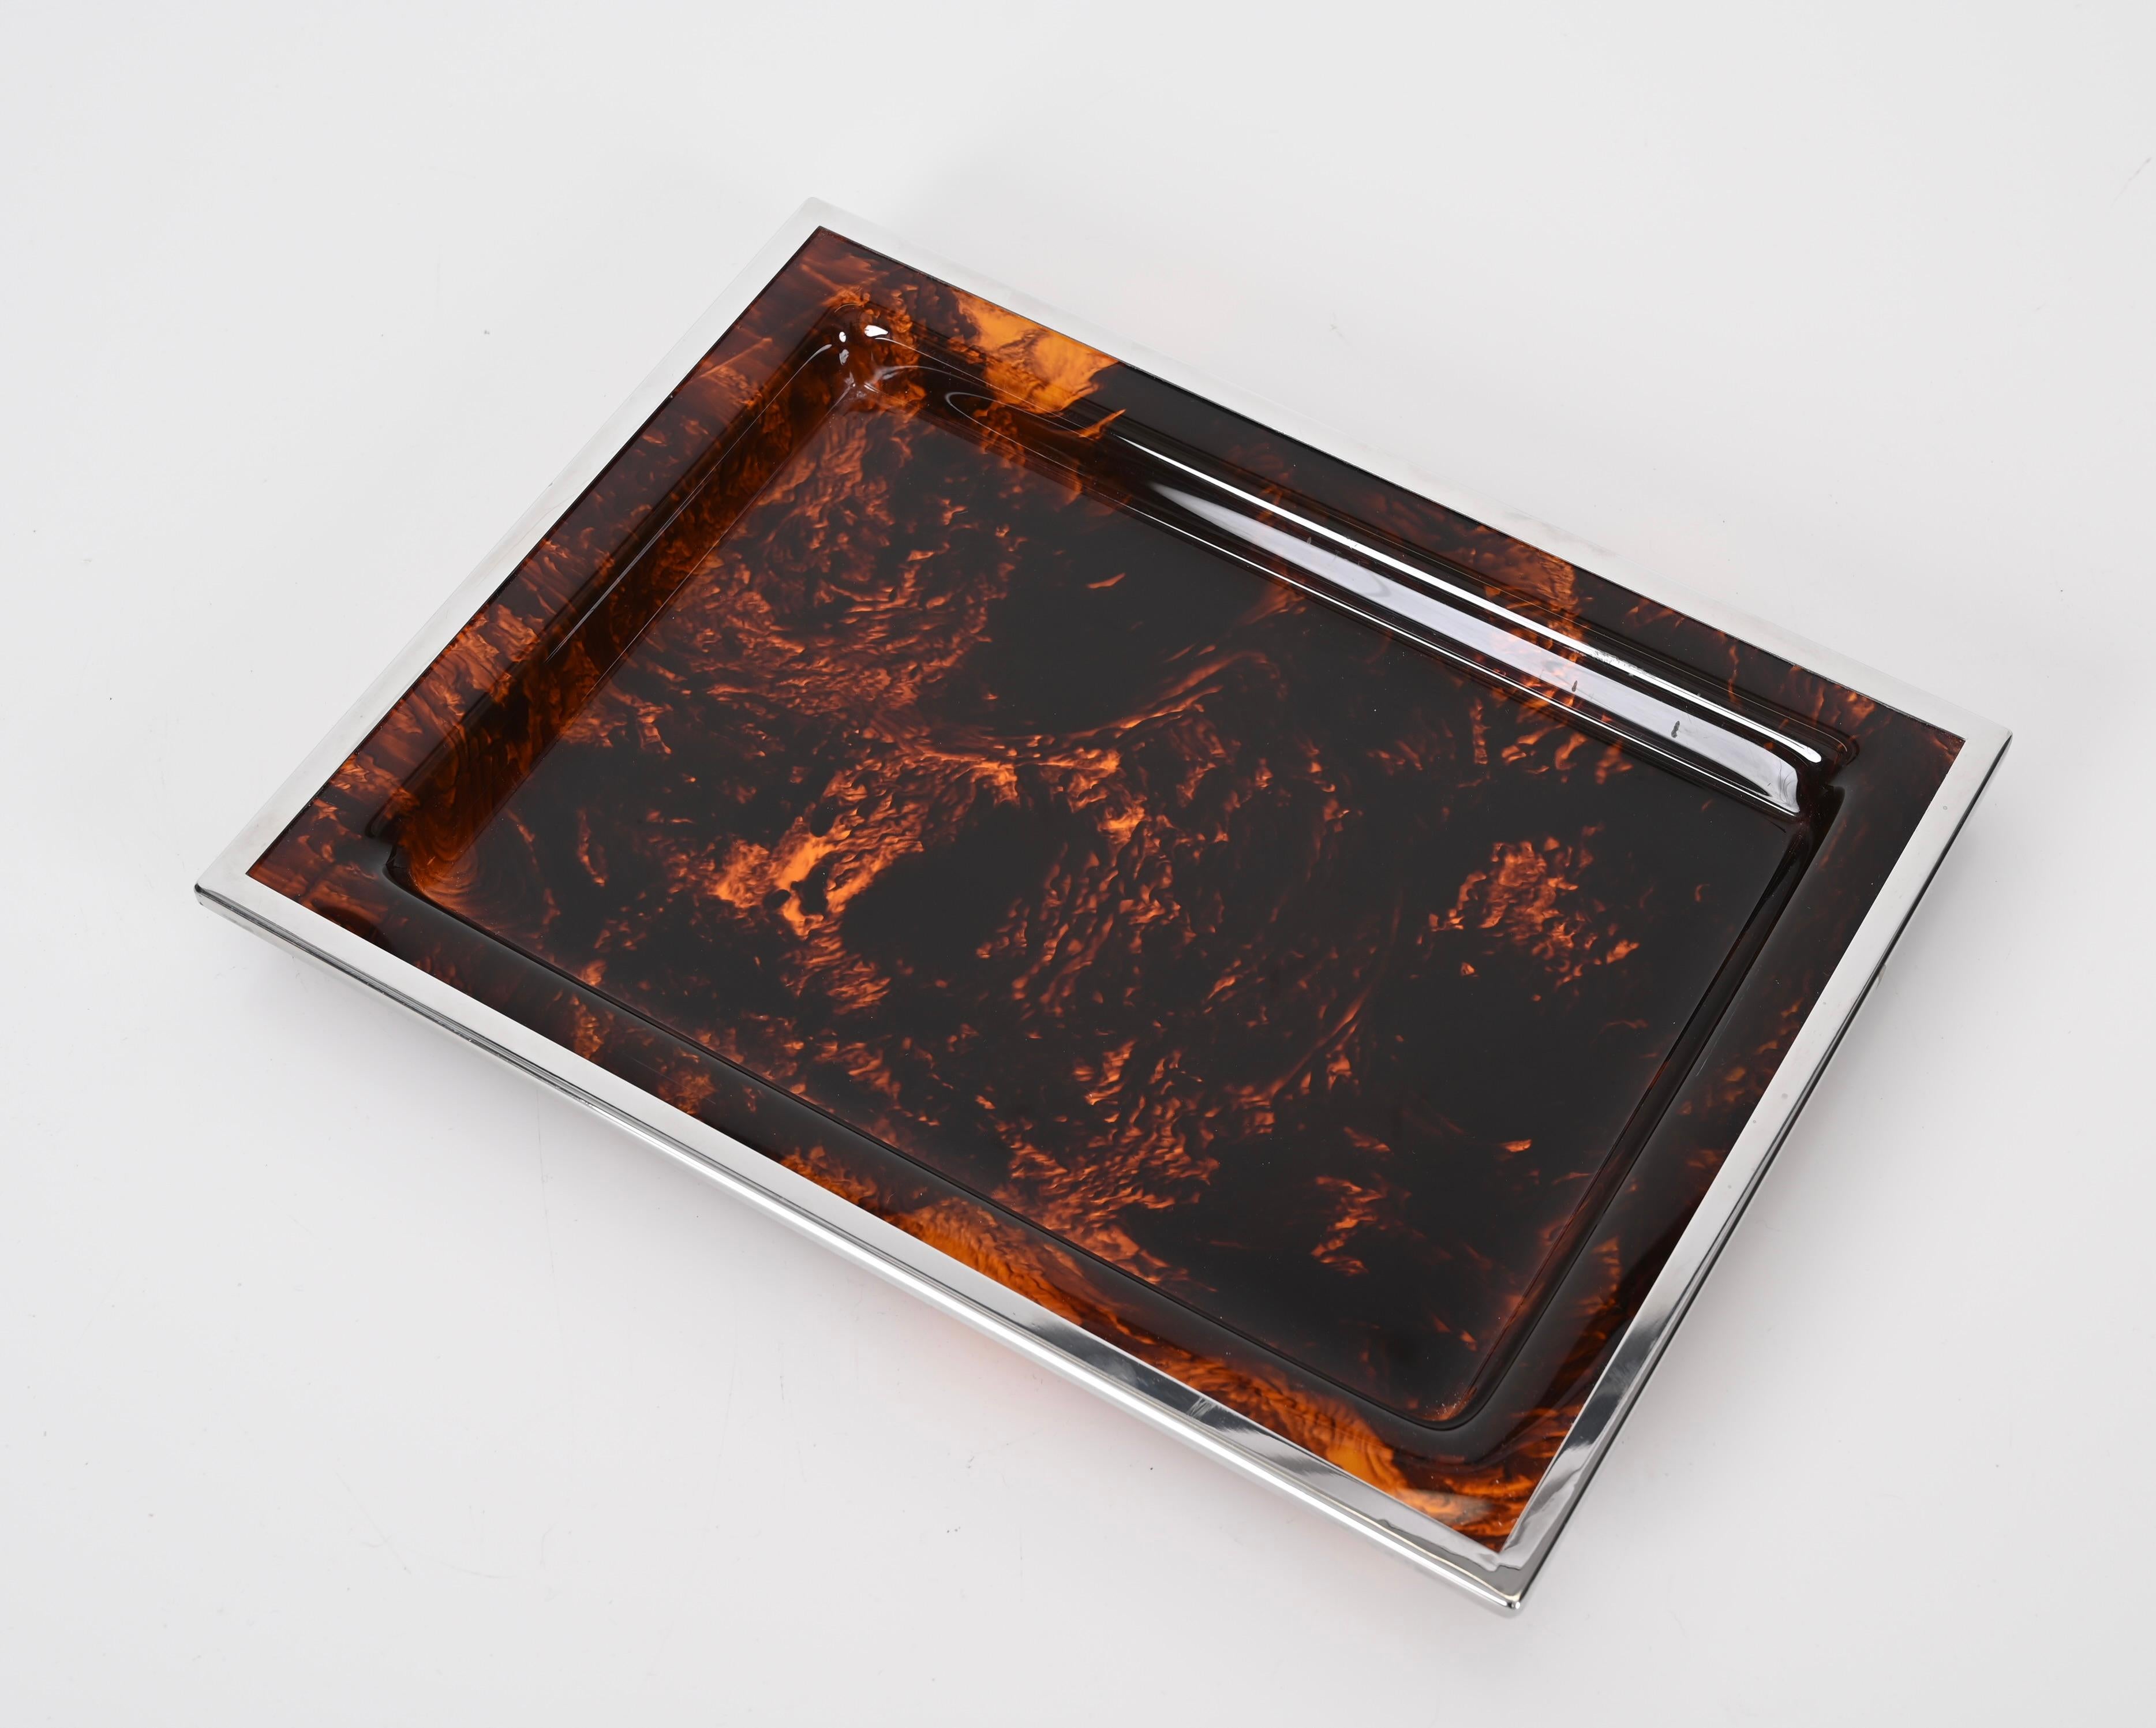 Christian Dior Tortoiseshell Effect Lucite and Chrome Serving Tray, Italy 1970s For Sale 5